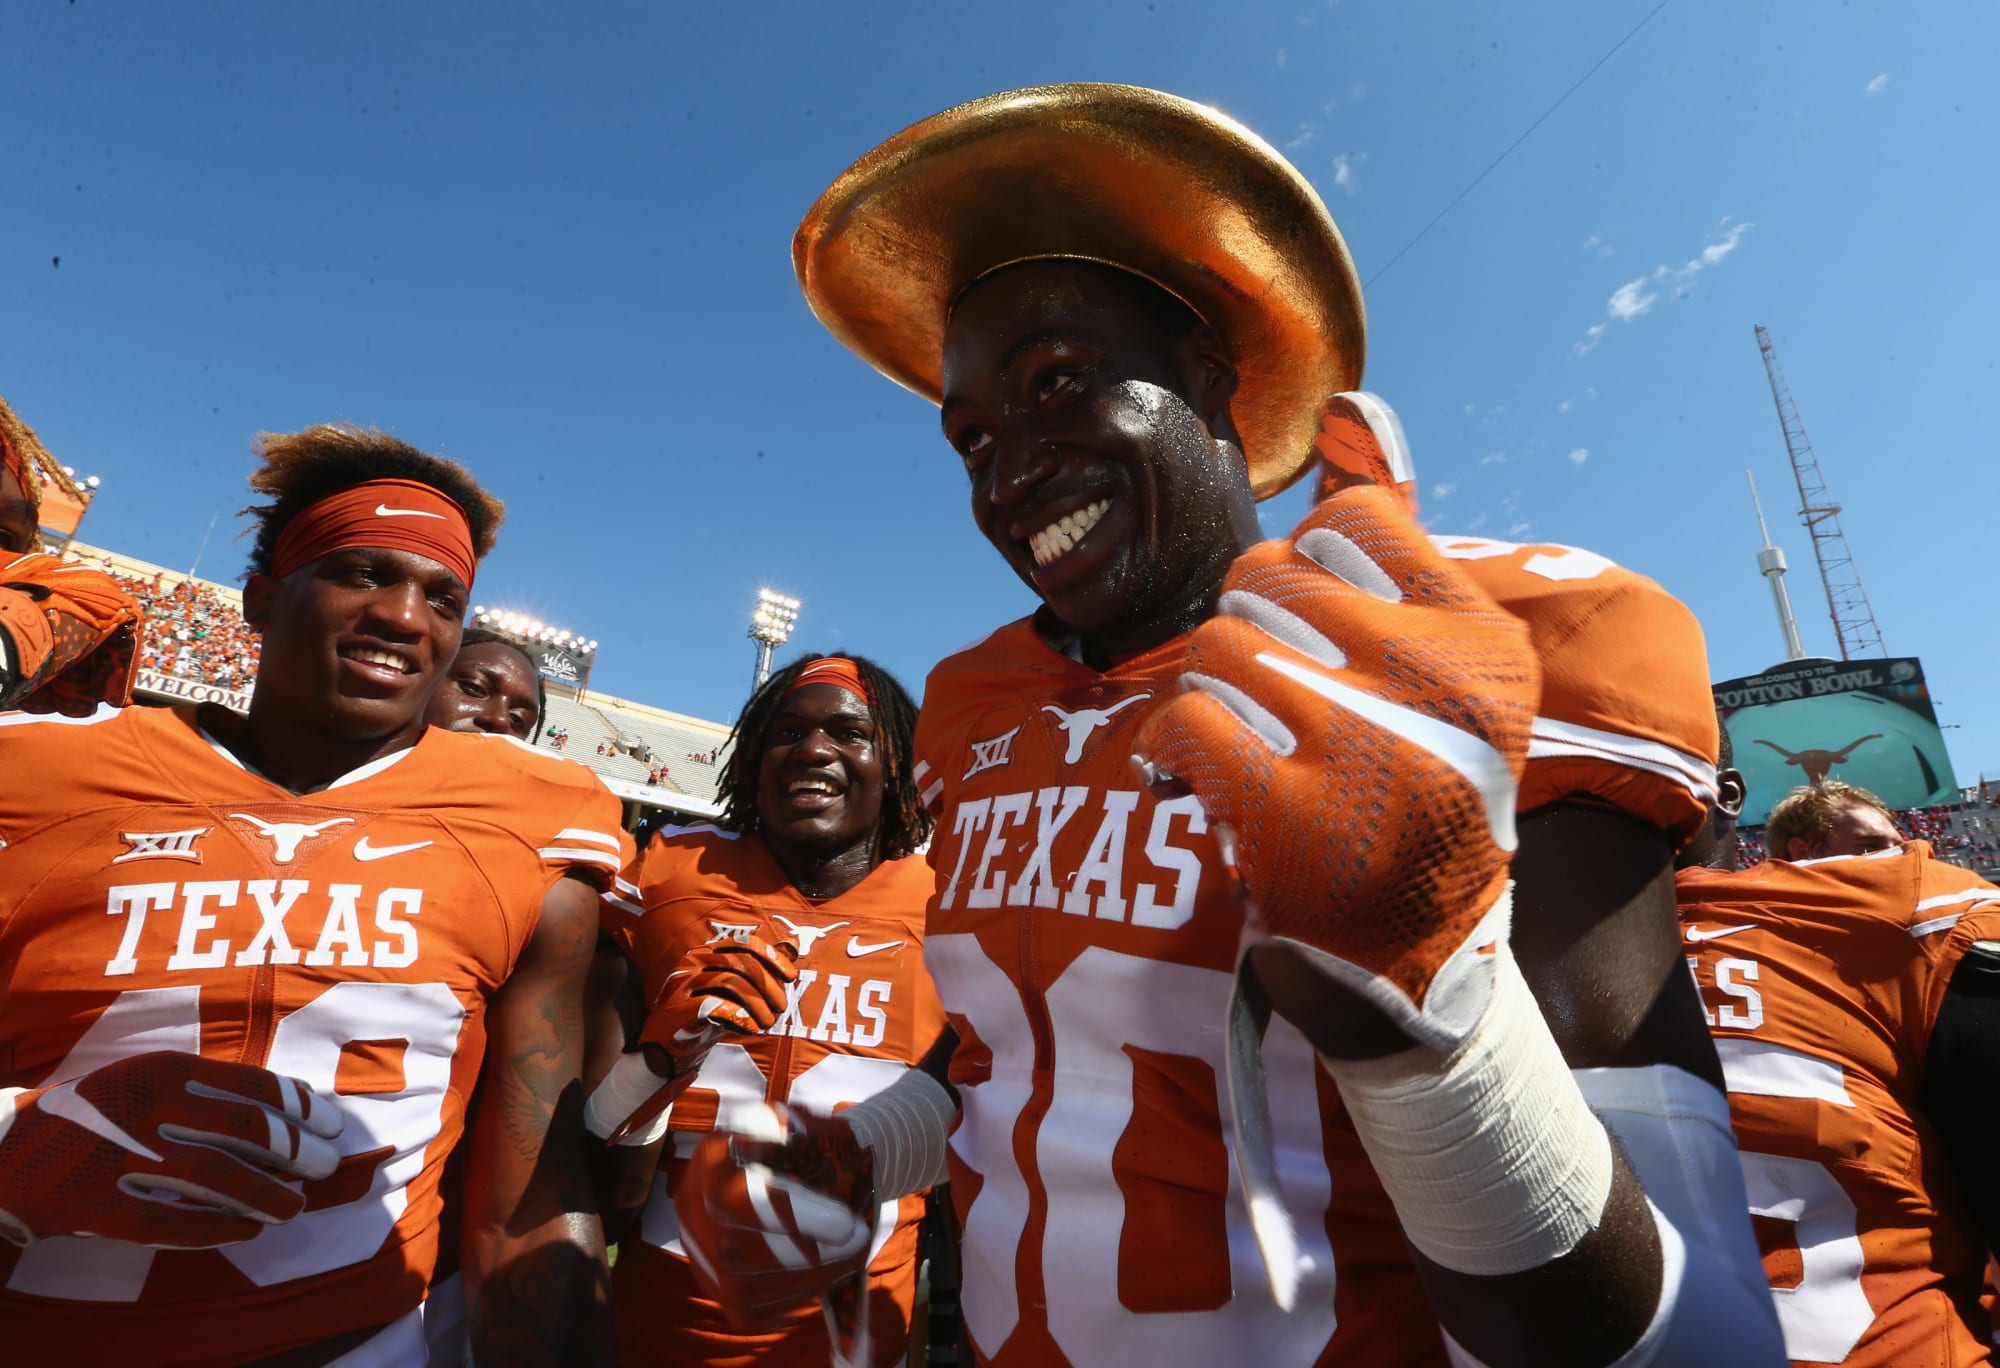 Red River Shootout Will the script soon flip for Texas over Oklahoma?